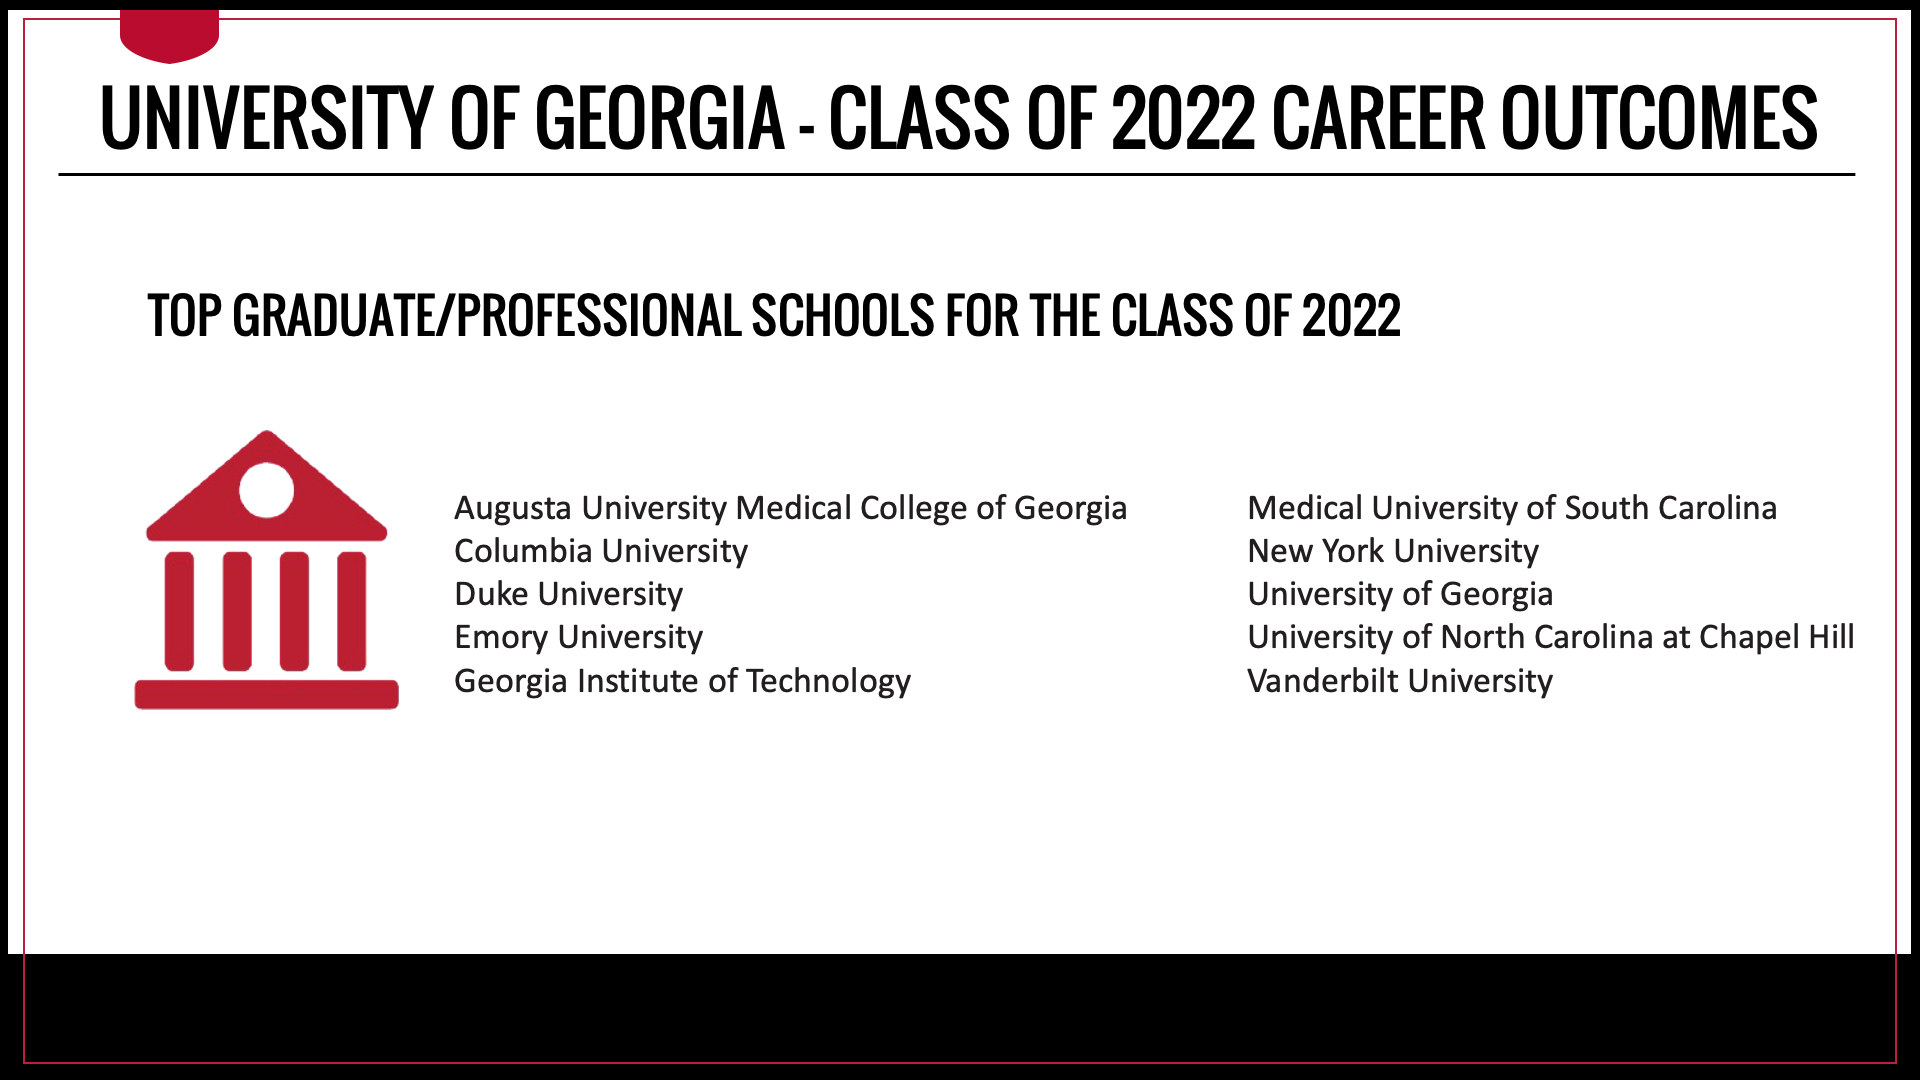 Top graduate and professional schools at which UGA Class of 2022 graduates have enrolled include Augusta University Medical College of Georgia, Columbia University, Duke University, Emory University, Georgia Institute of Technology, Medical University of South Carolina, New York University, University of Georgia, University of North Carolina at Chapel Hill, and Vanderbilt University